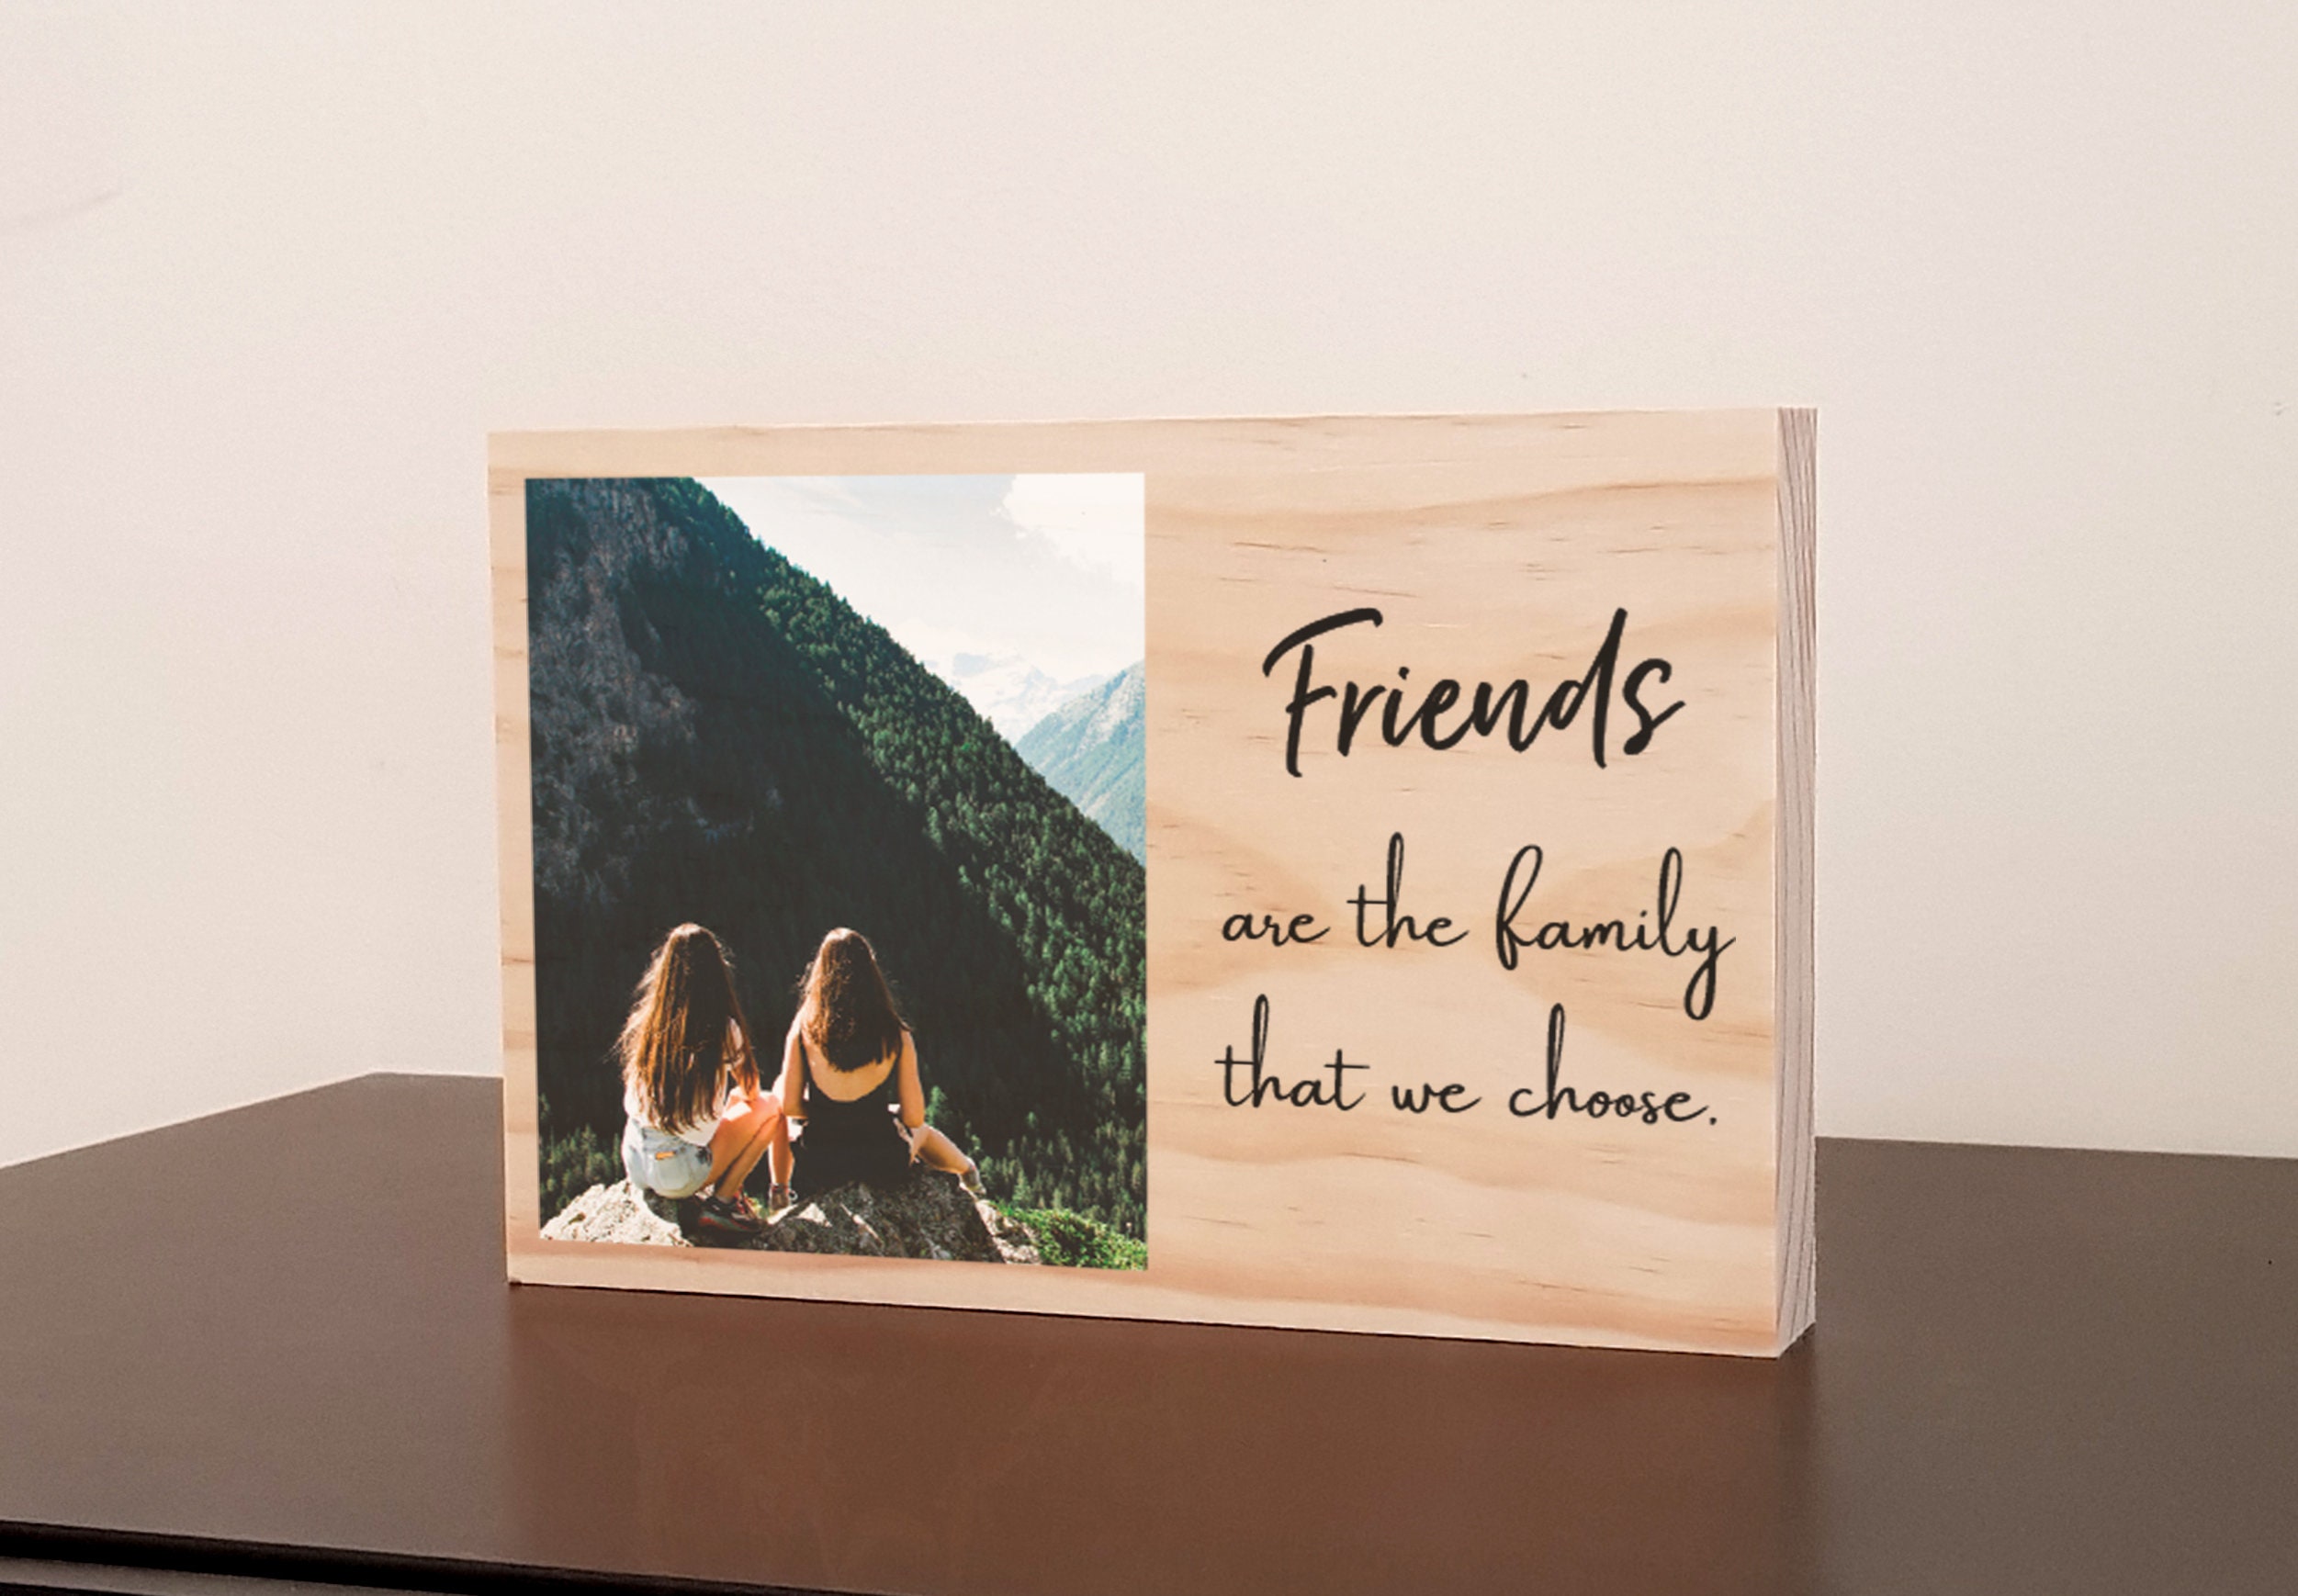 45+ Small Gifts Ideas for a Friend